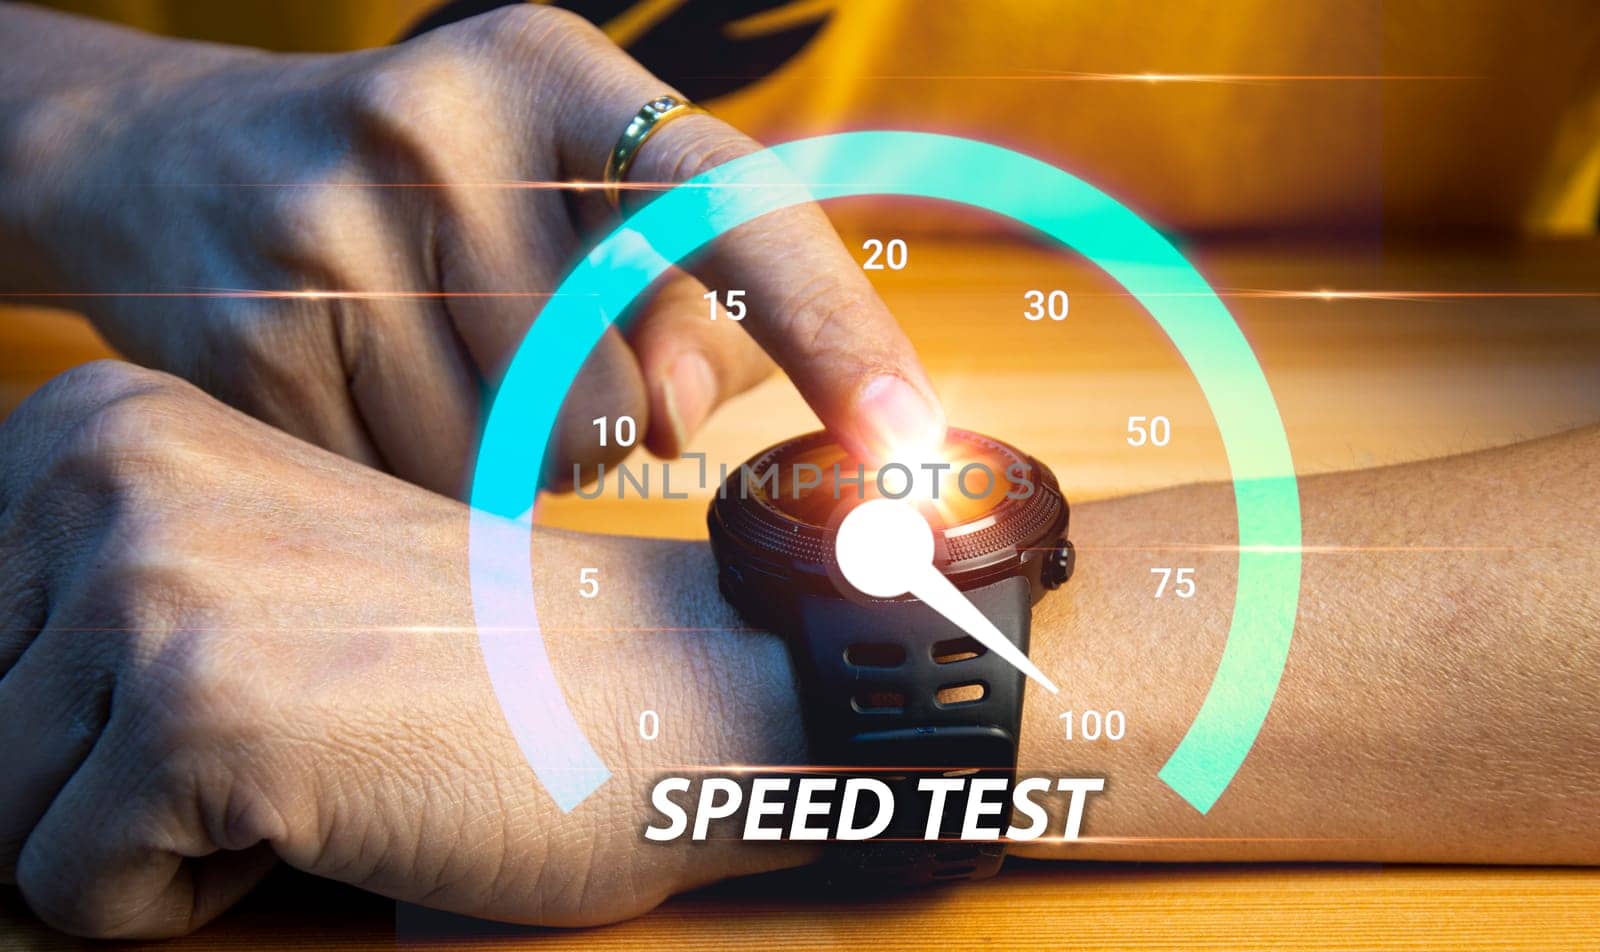 fast internet connection speedtest network bandwidth technology Man using high speed internet with smartphone and laptop computer. 5G quality, speed optimization. by boonruen